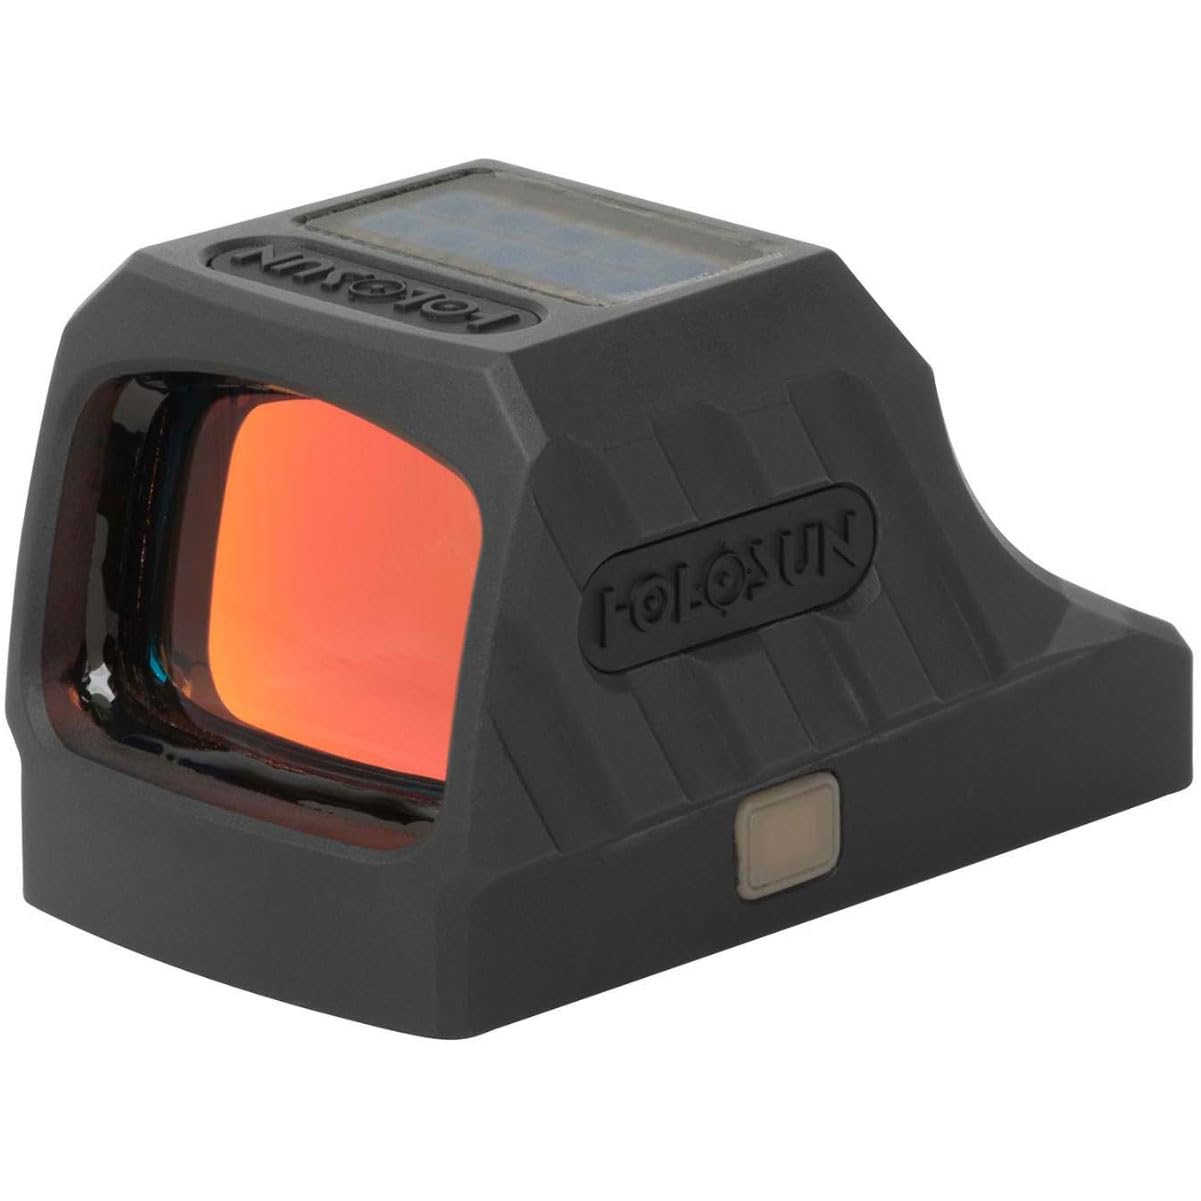 HOLOSUN SCS 320 Green 2 MOA Dot/32 MOA Circle Parallax-Free Pistol Sight Compatible with P320 Optics Ready Handguns - Solar Charging Sight with Multi-Reticle System & Auto Adjusting Reticle Brightness